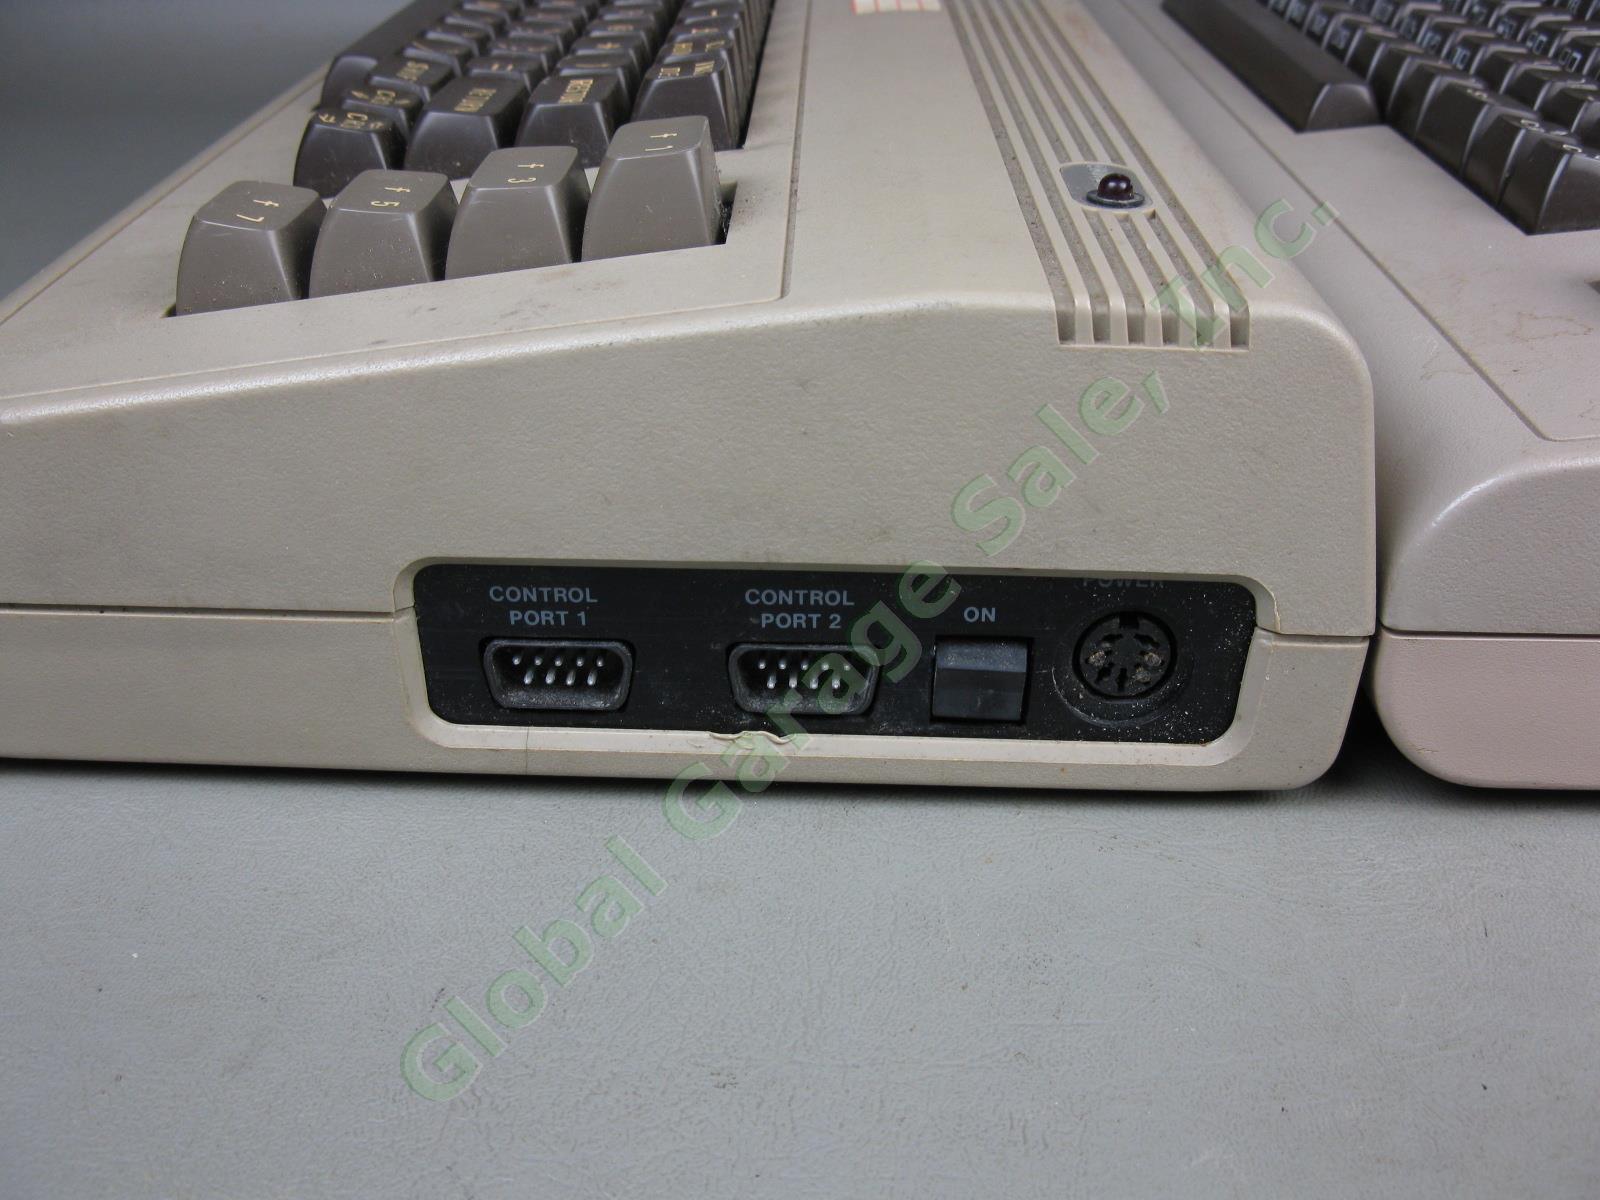 2 Vtg Commodore 64 Personal Computers Lot Untested As-Is Parts/Repair No Power?? 3